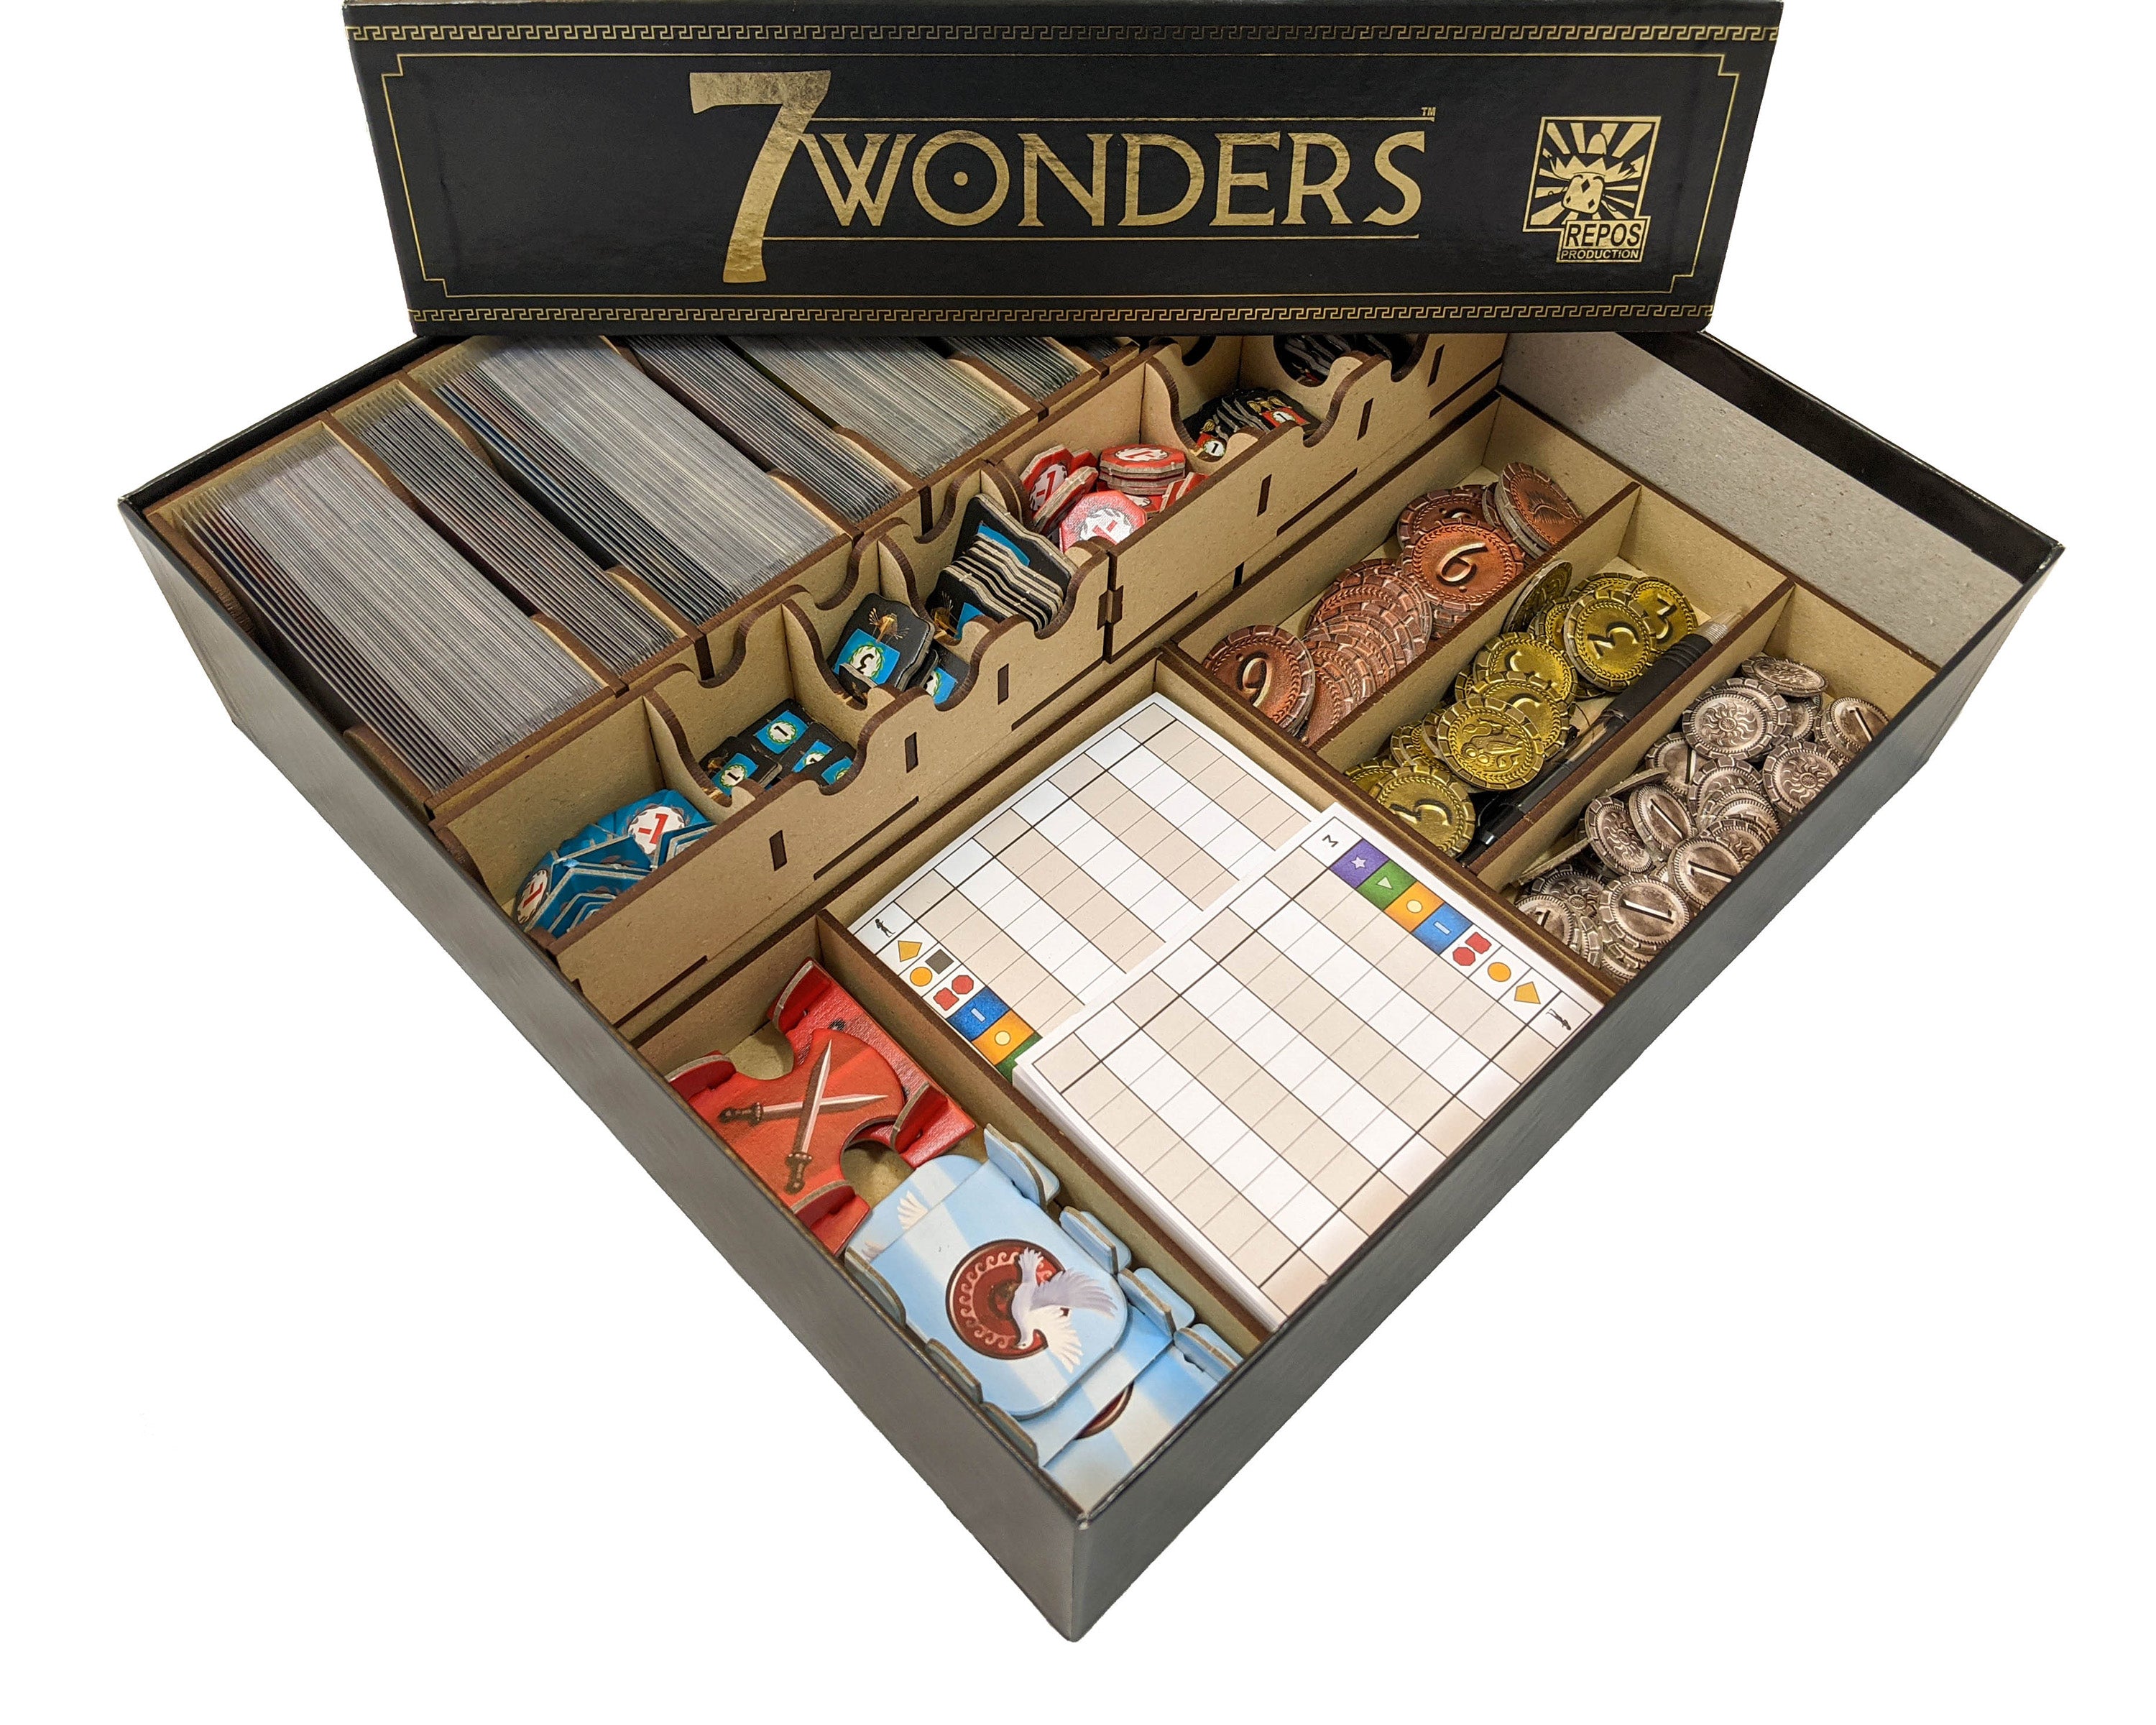 Super useful wooden board game organizers are on sale for Cyber Monday -  Polygon